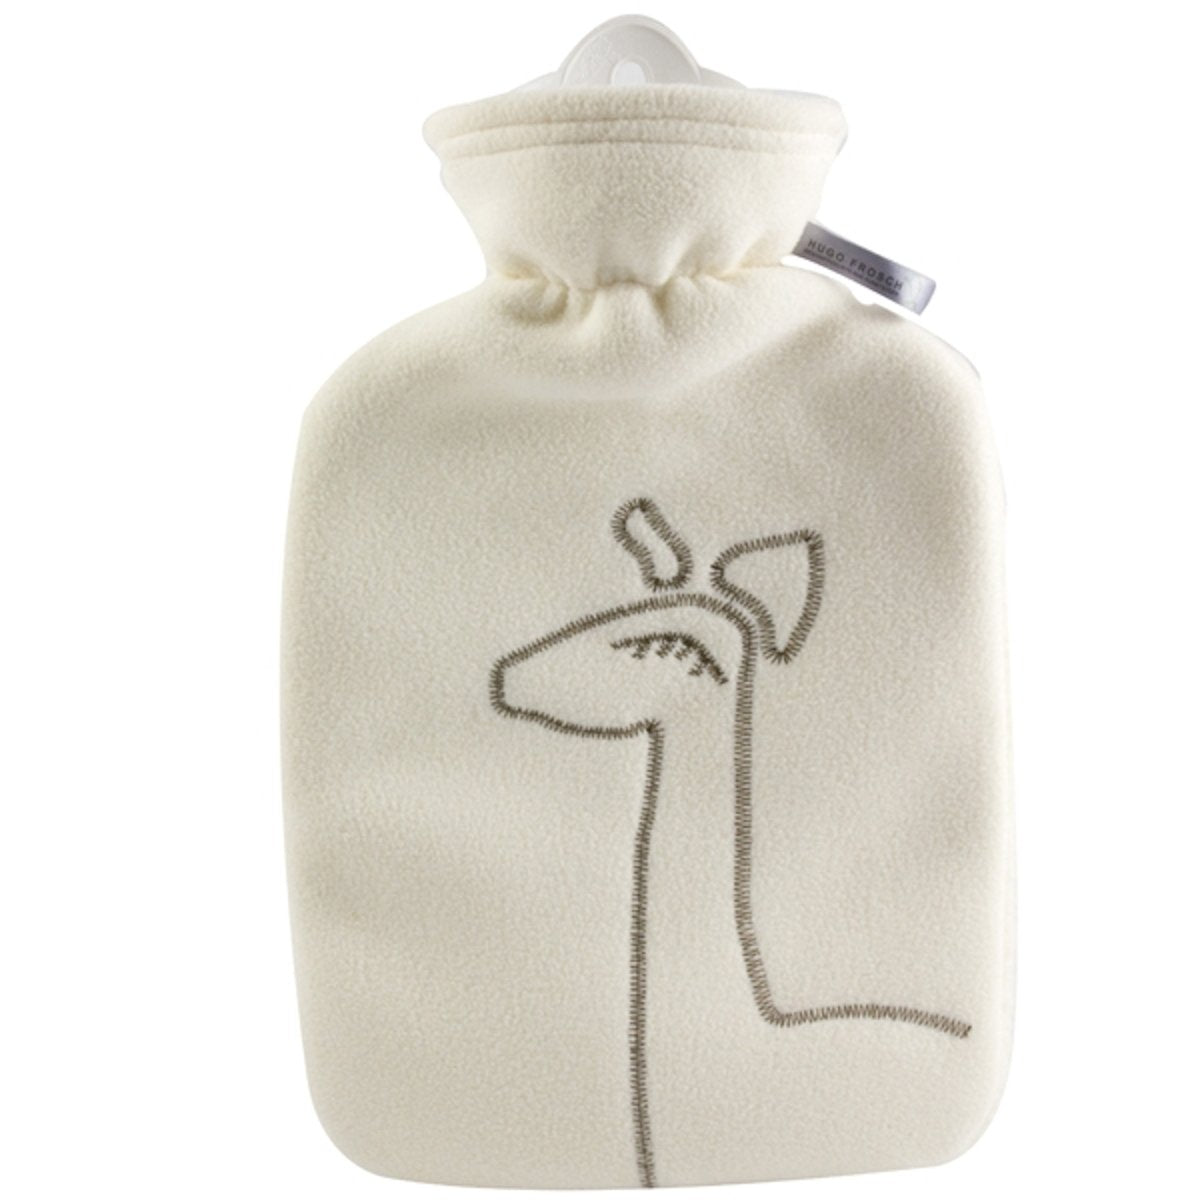 Hot Water Bottle Classic with Cover, Double Fleece Cover - Cream Giraffe